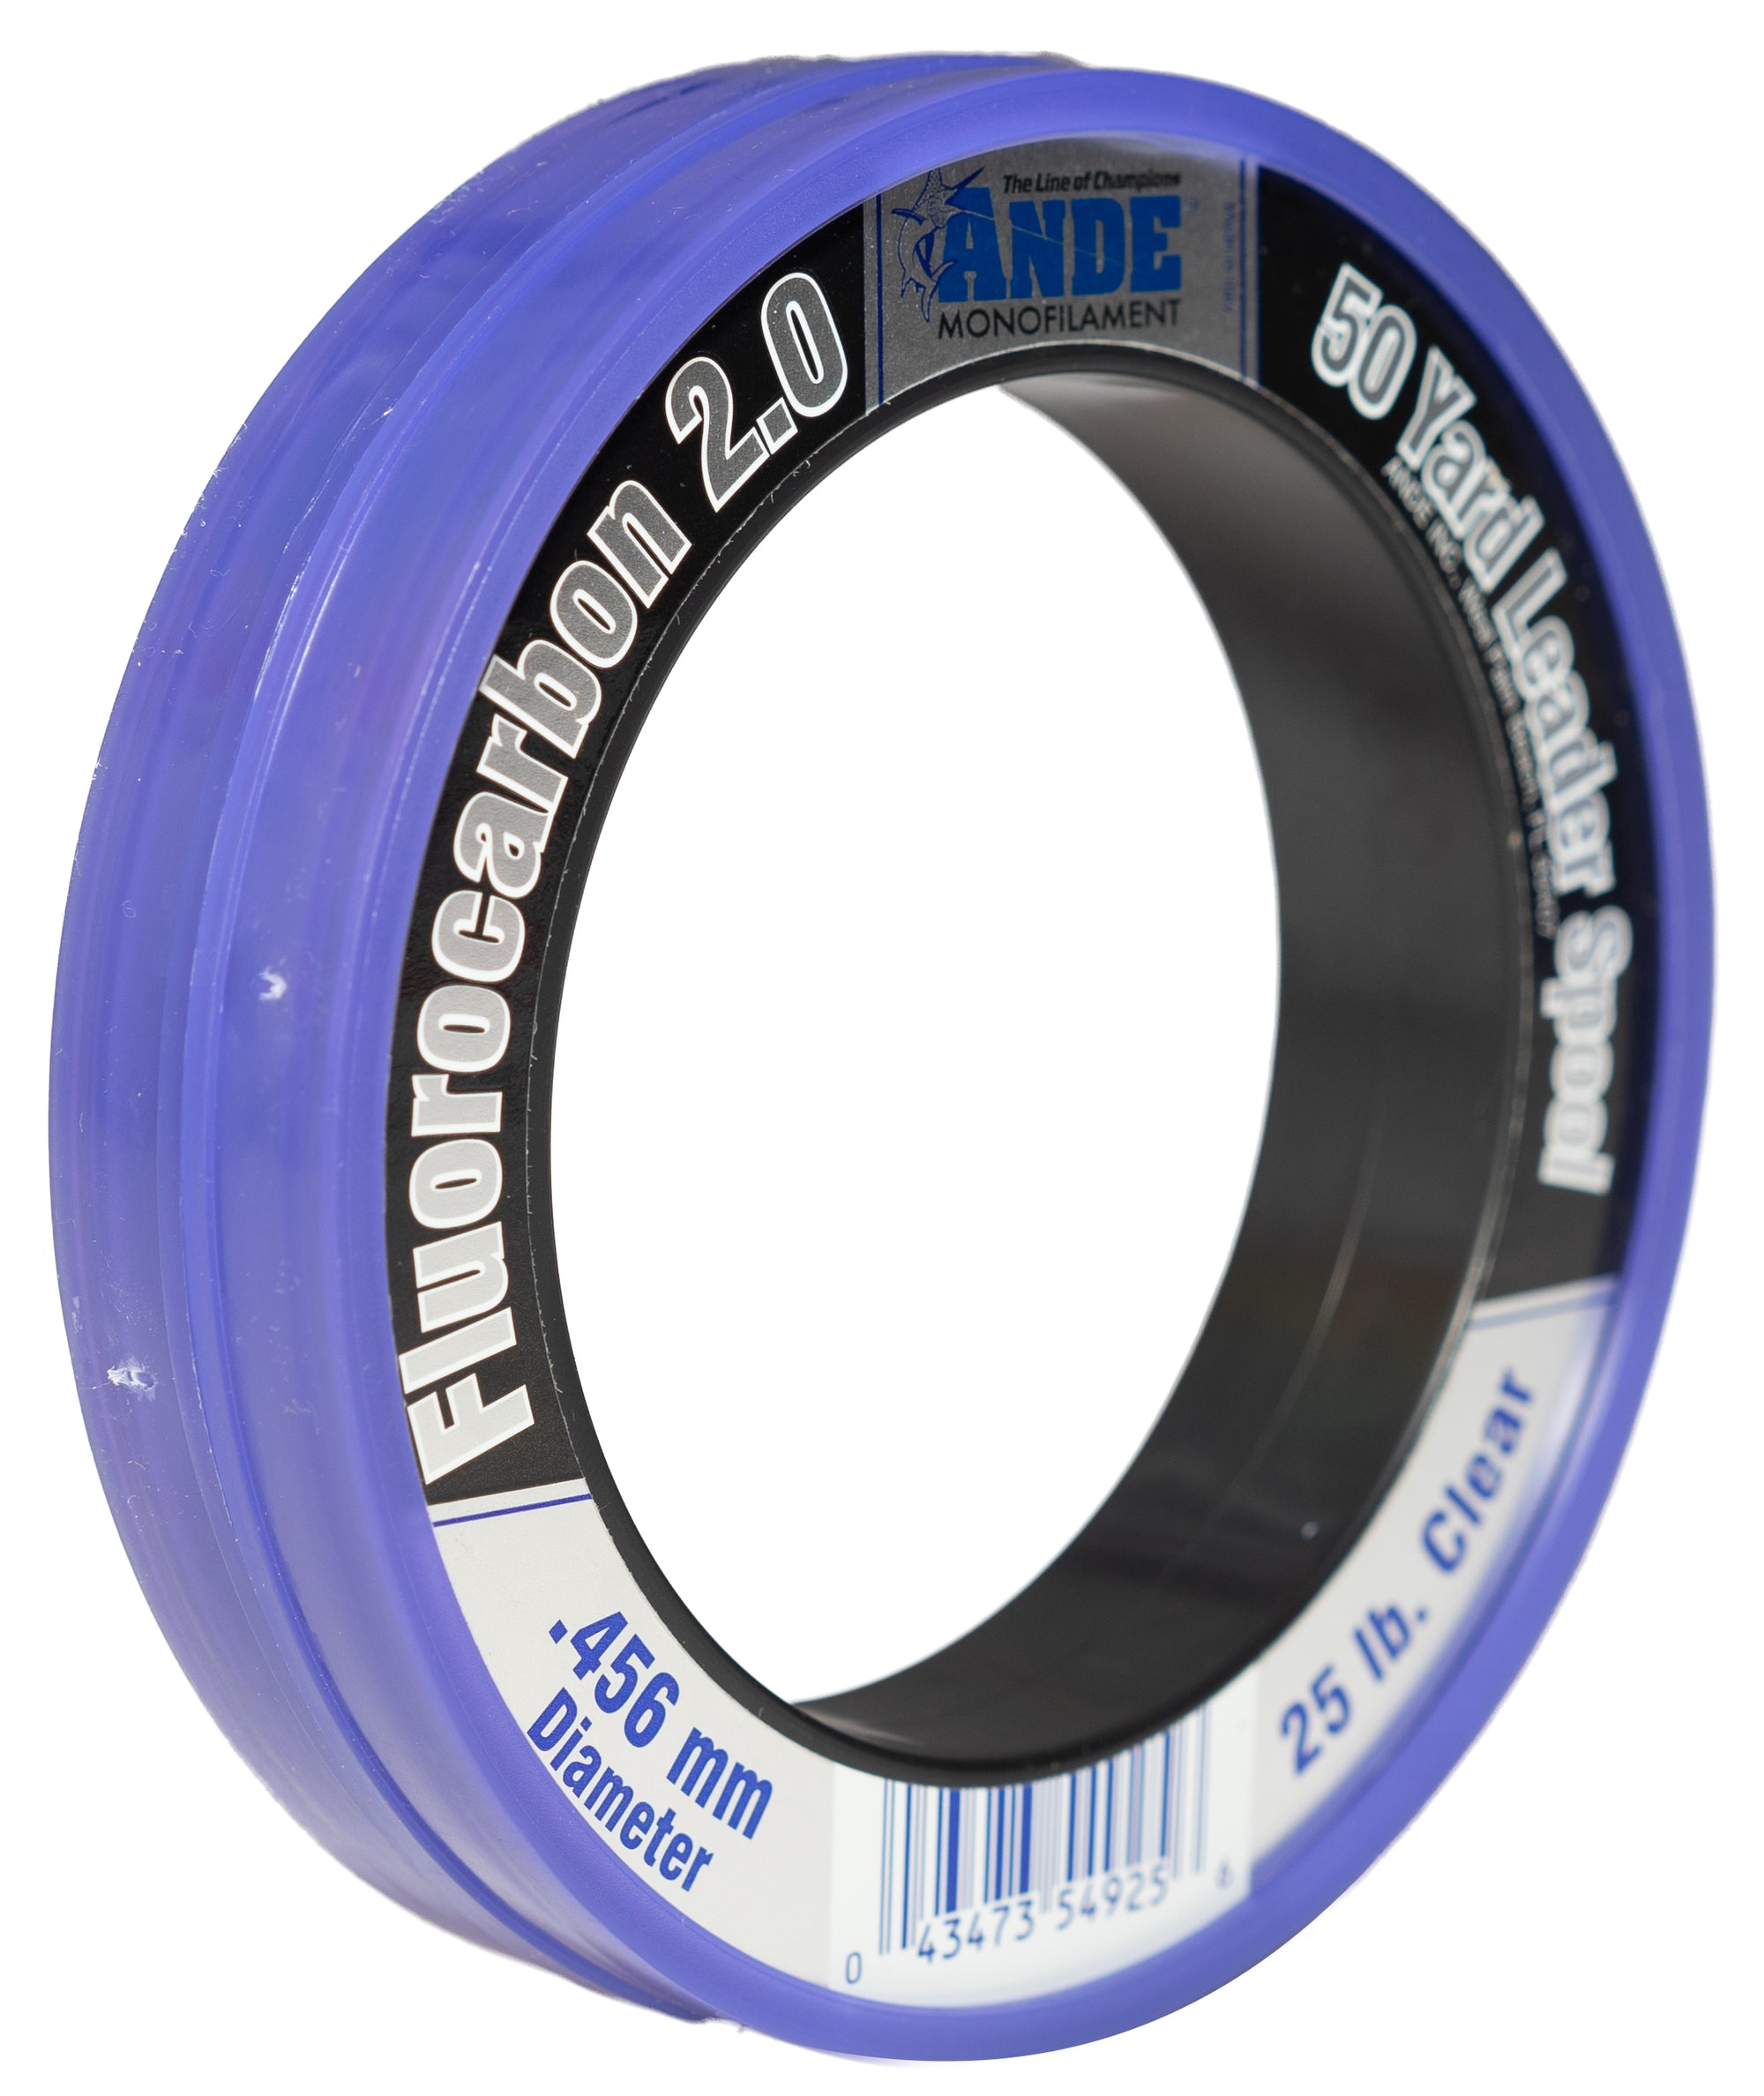 Ande 300# Monofilament Leader 50 yd. – Crook and Crook Fishing